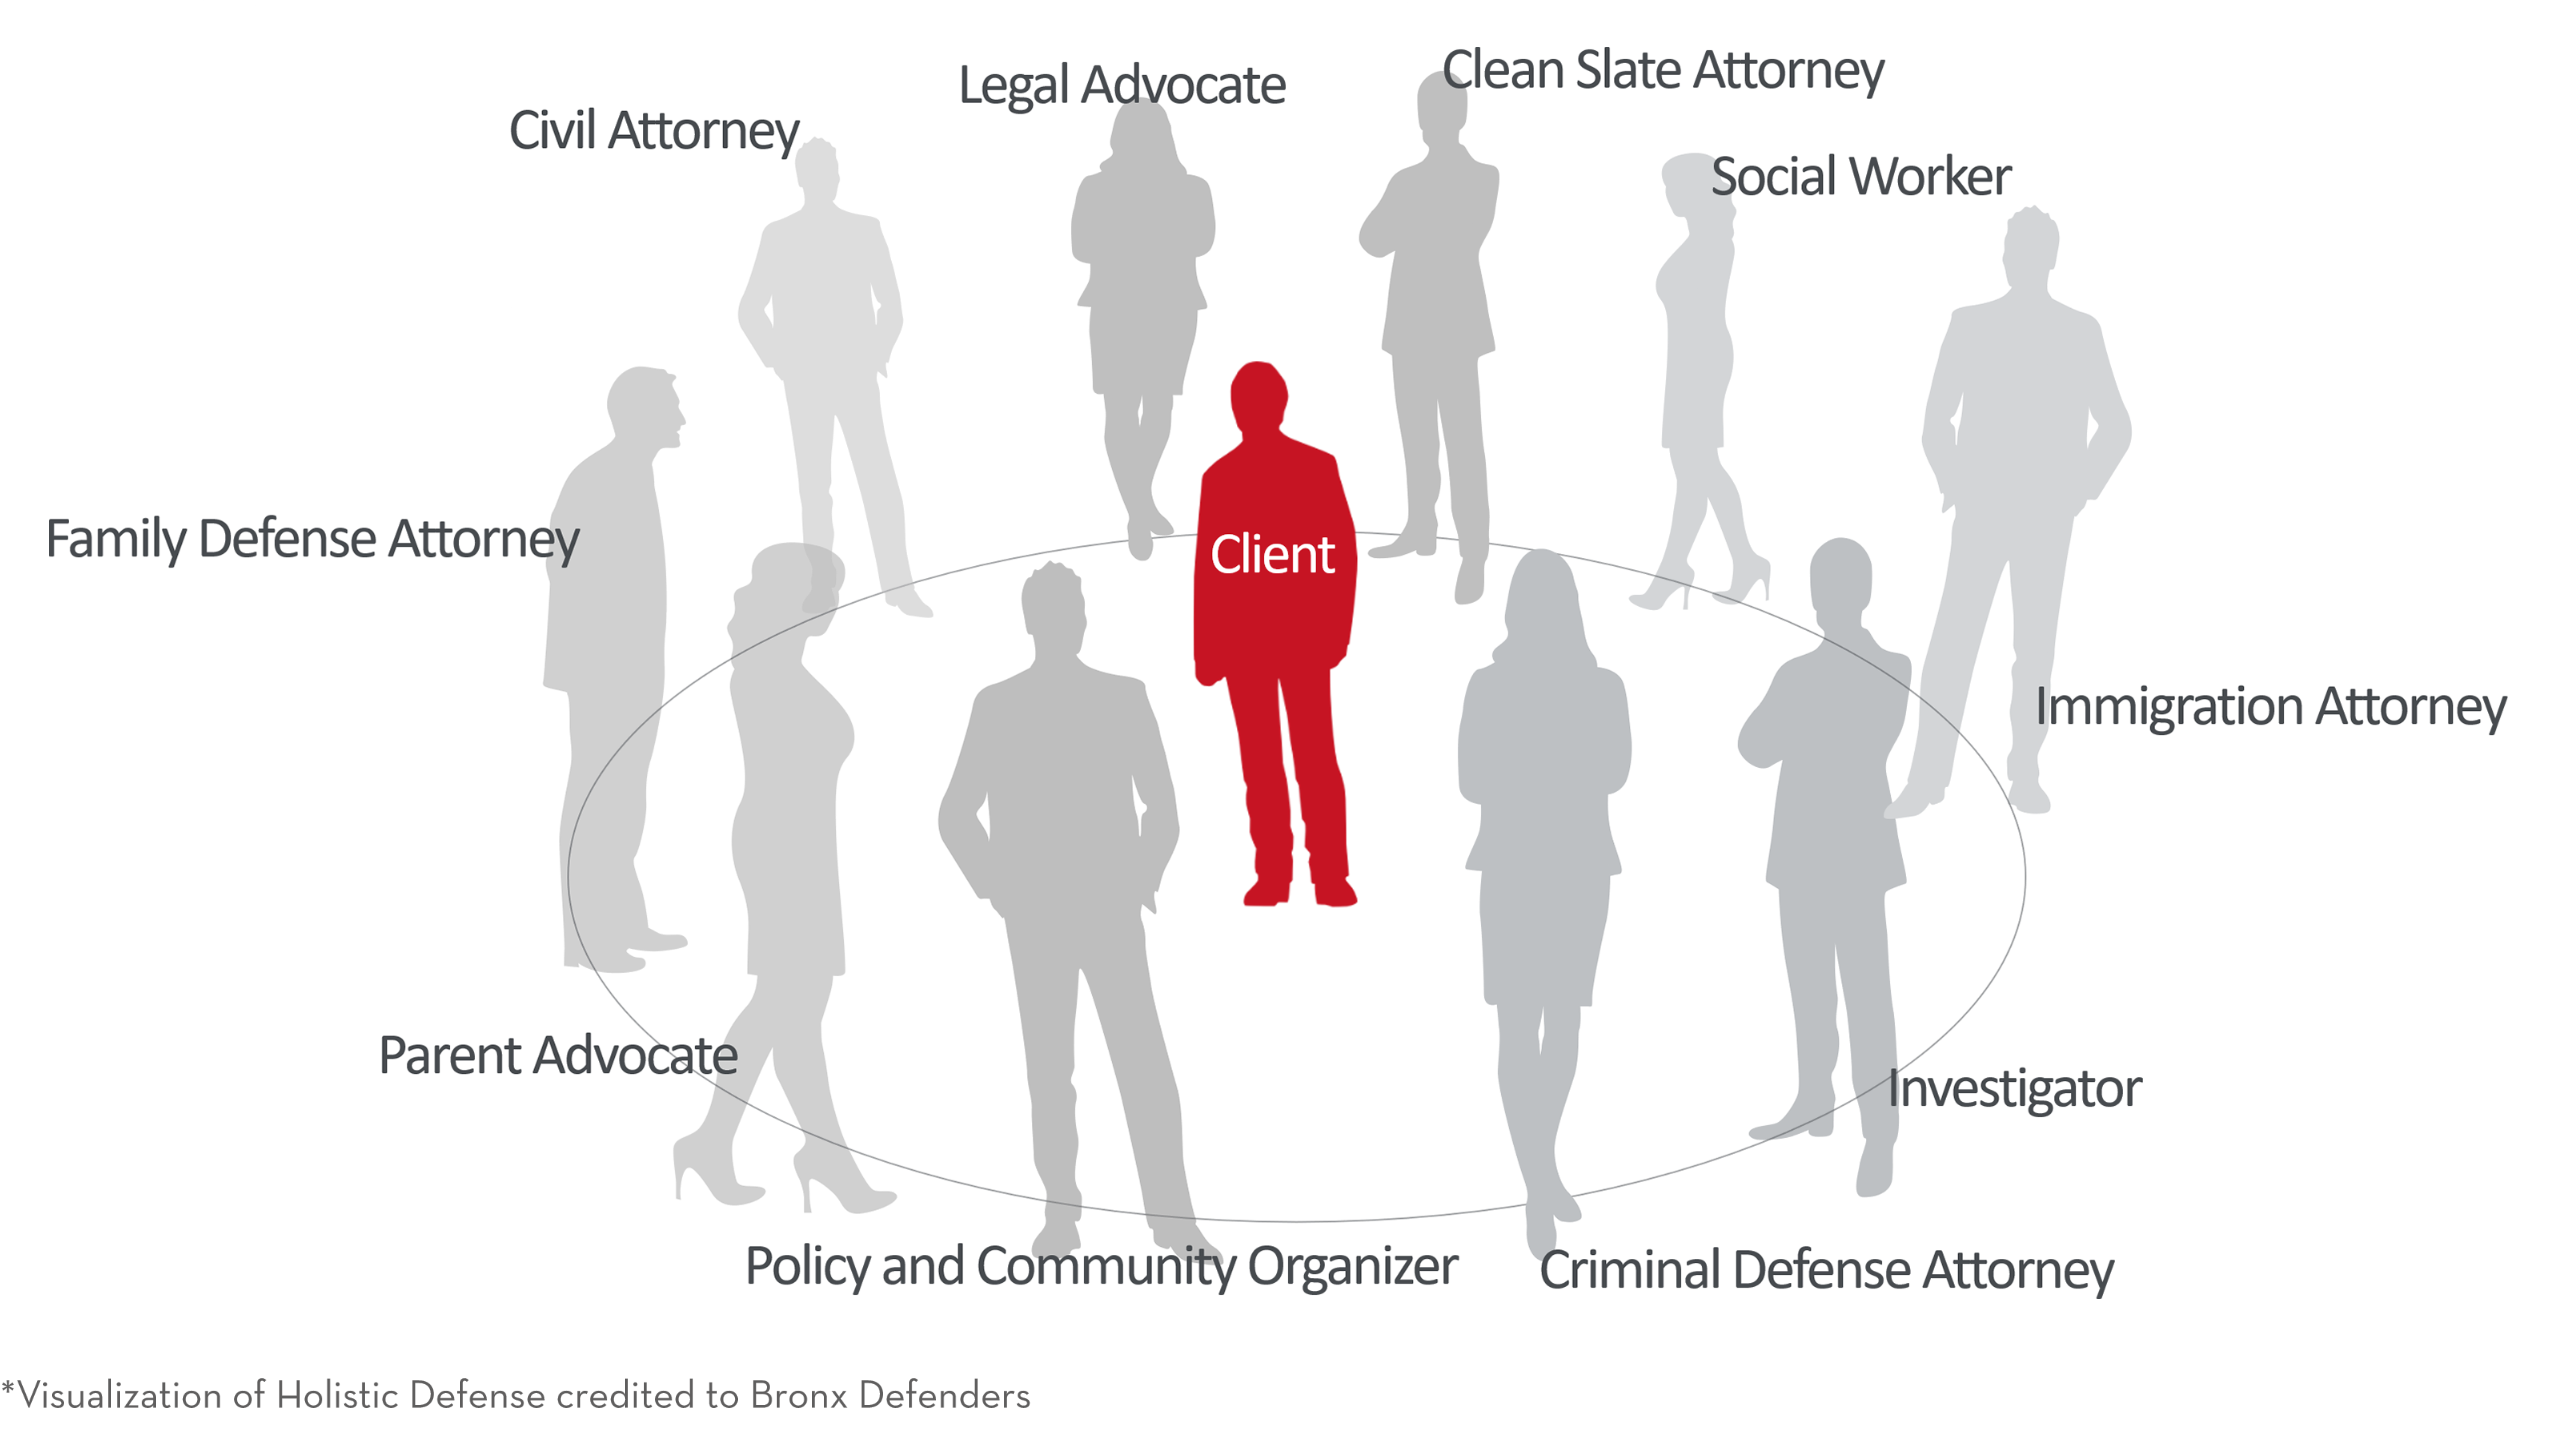 Silhouette of client surrounded by circle of attorneys, social workers and more team members.